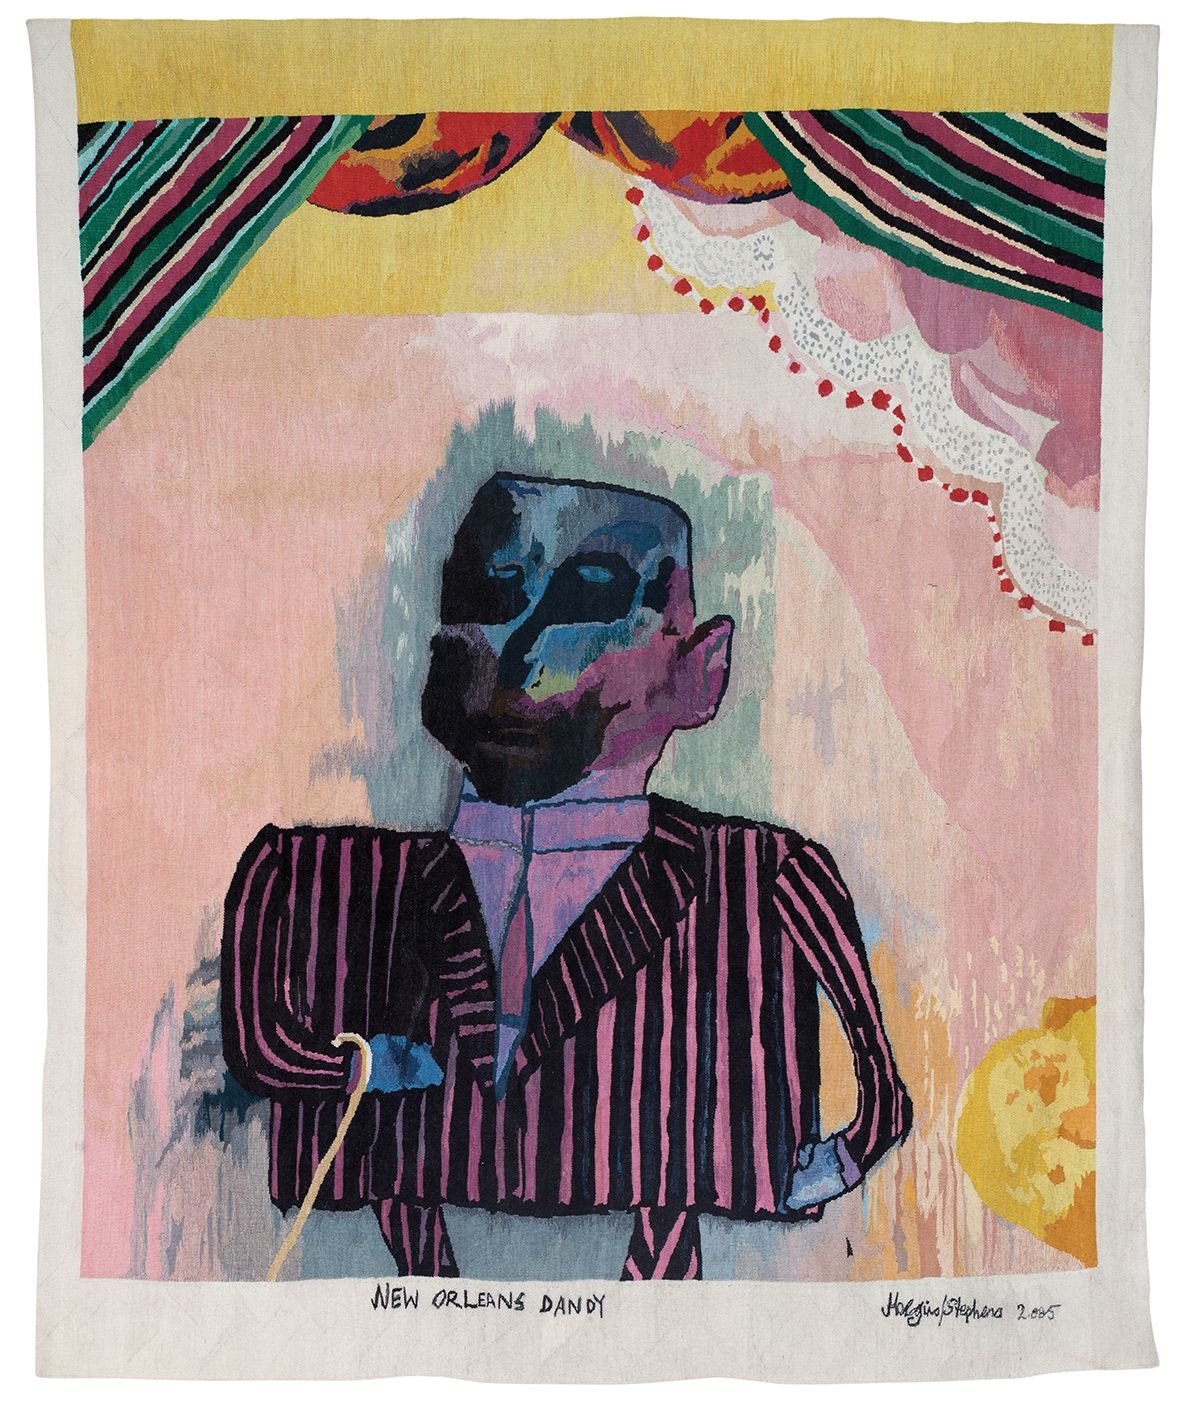 Click the image for a view of: Robert Hodgins. New Orleans Dandy. 2013 designed 2009. Mohair tapestry. 1/3. 2800X2310mm